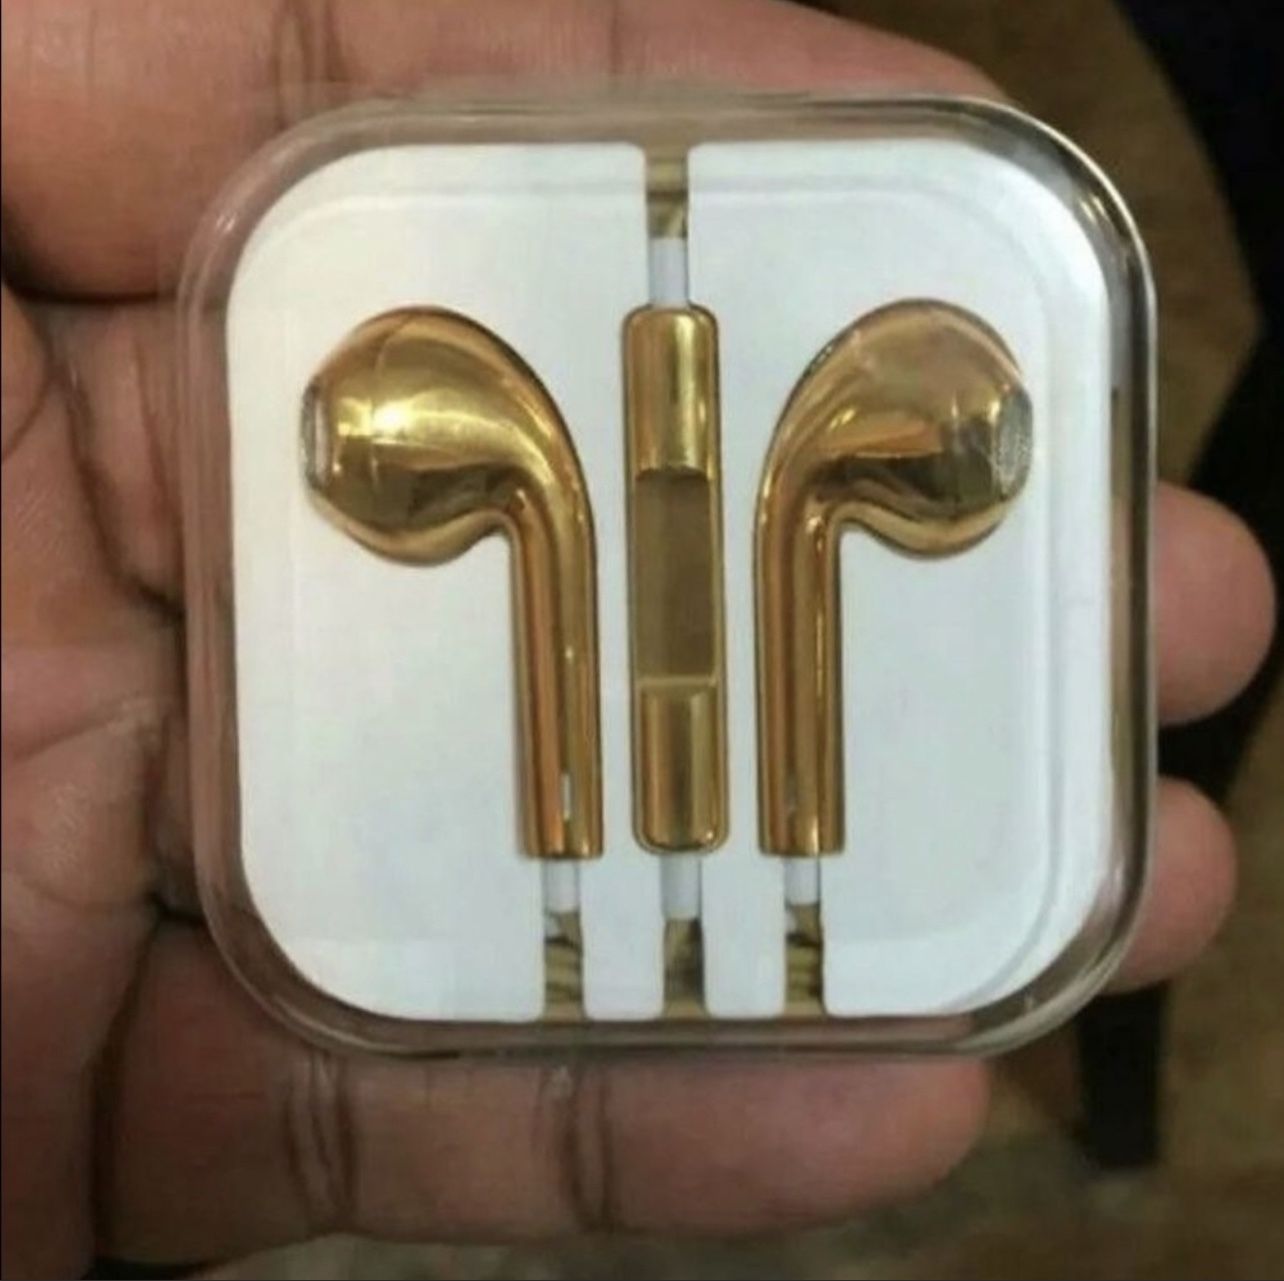 GOLD  EARBUDS HEADPHONES 🔥🔥 REMOTE VOLUME CONTROL MIC 🔥🔥FOR IPHONE/SAMSUNG /LG/ANDROIDS/UNIVERSAL 🔥🔥🔥 